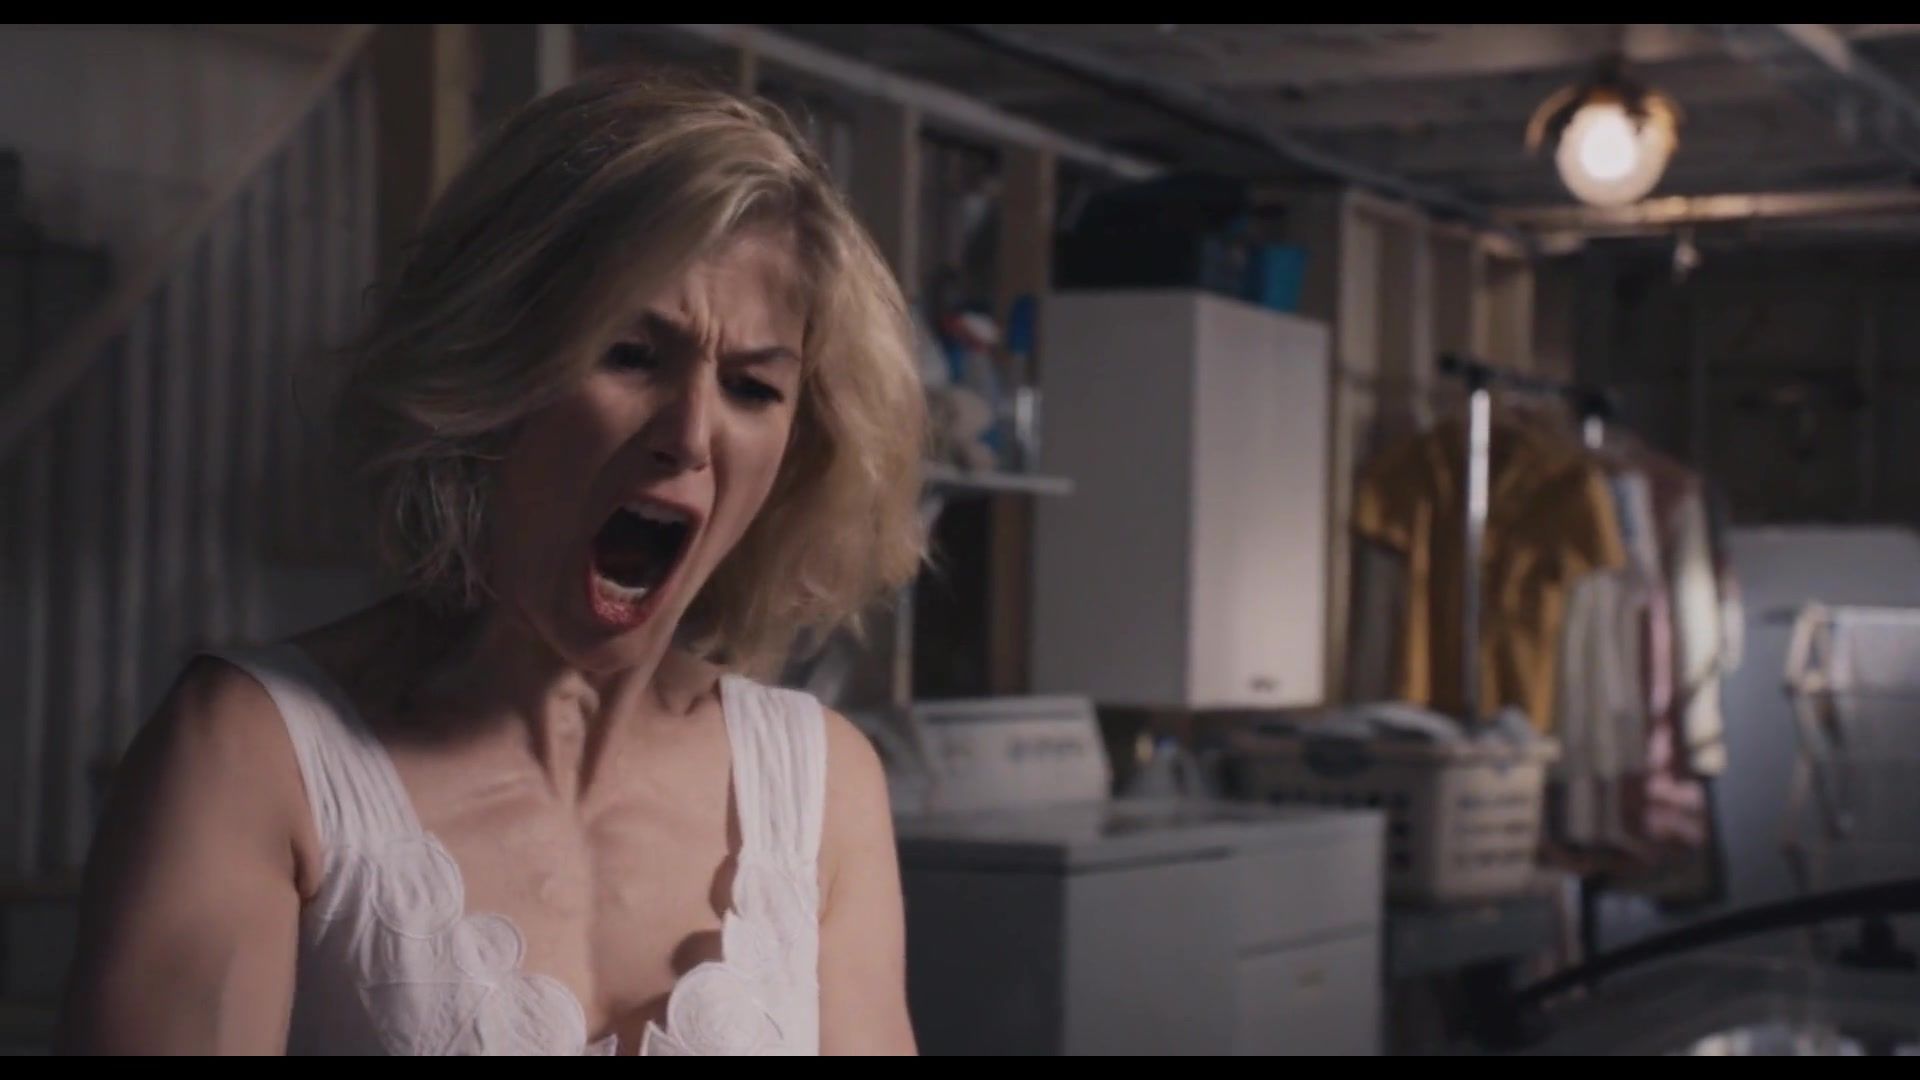 Plumper Watch sexy Rosamund Pike gives Ruined Orgasm Handjob to Wounded Man Fun - 2